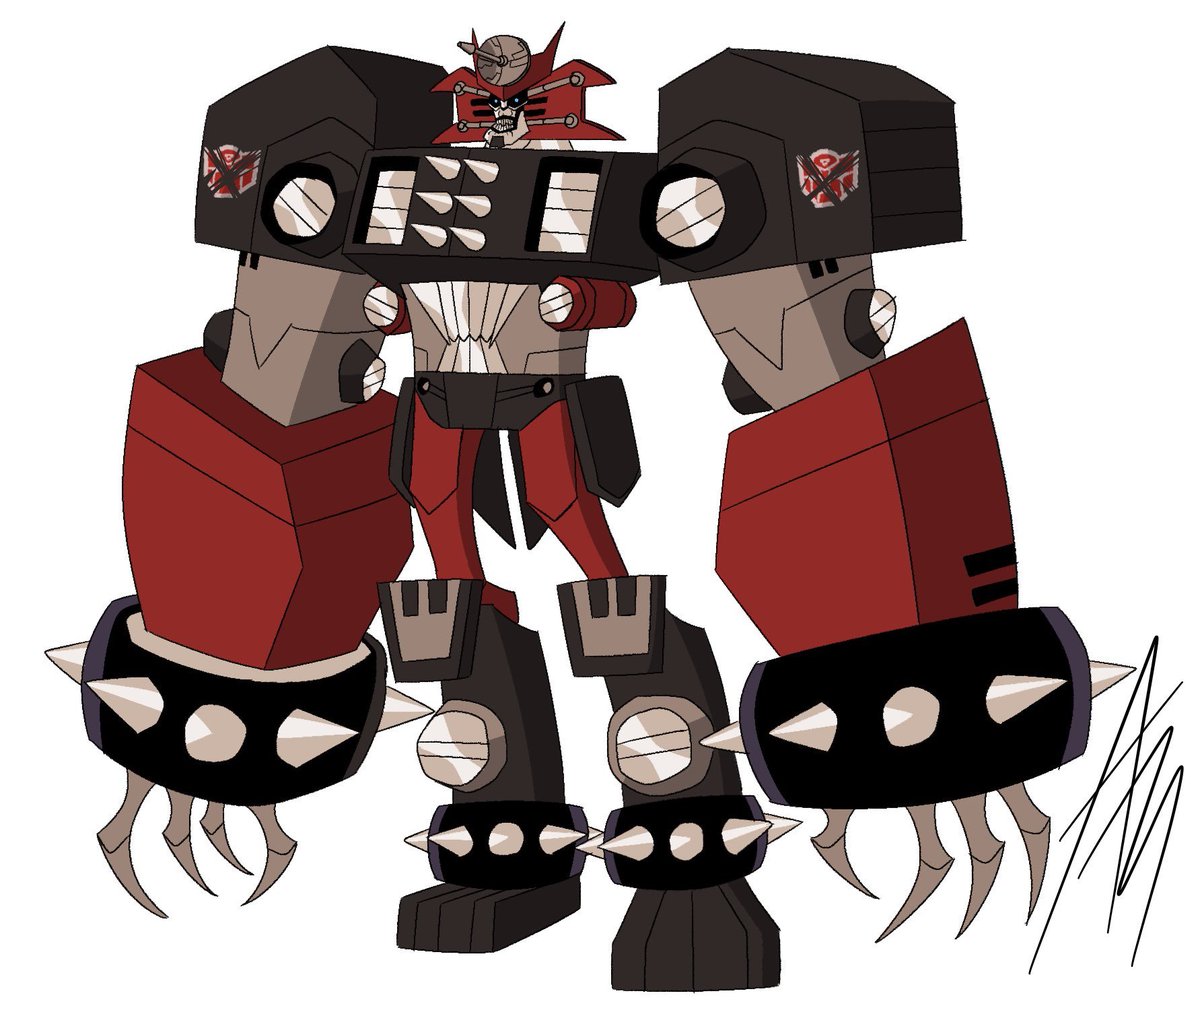 TFA SUNDER BABY

Really tried to channel mid-2000s action cartoons with this design. Particularly, Dr Destiny from Justice League